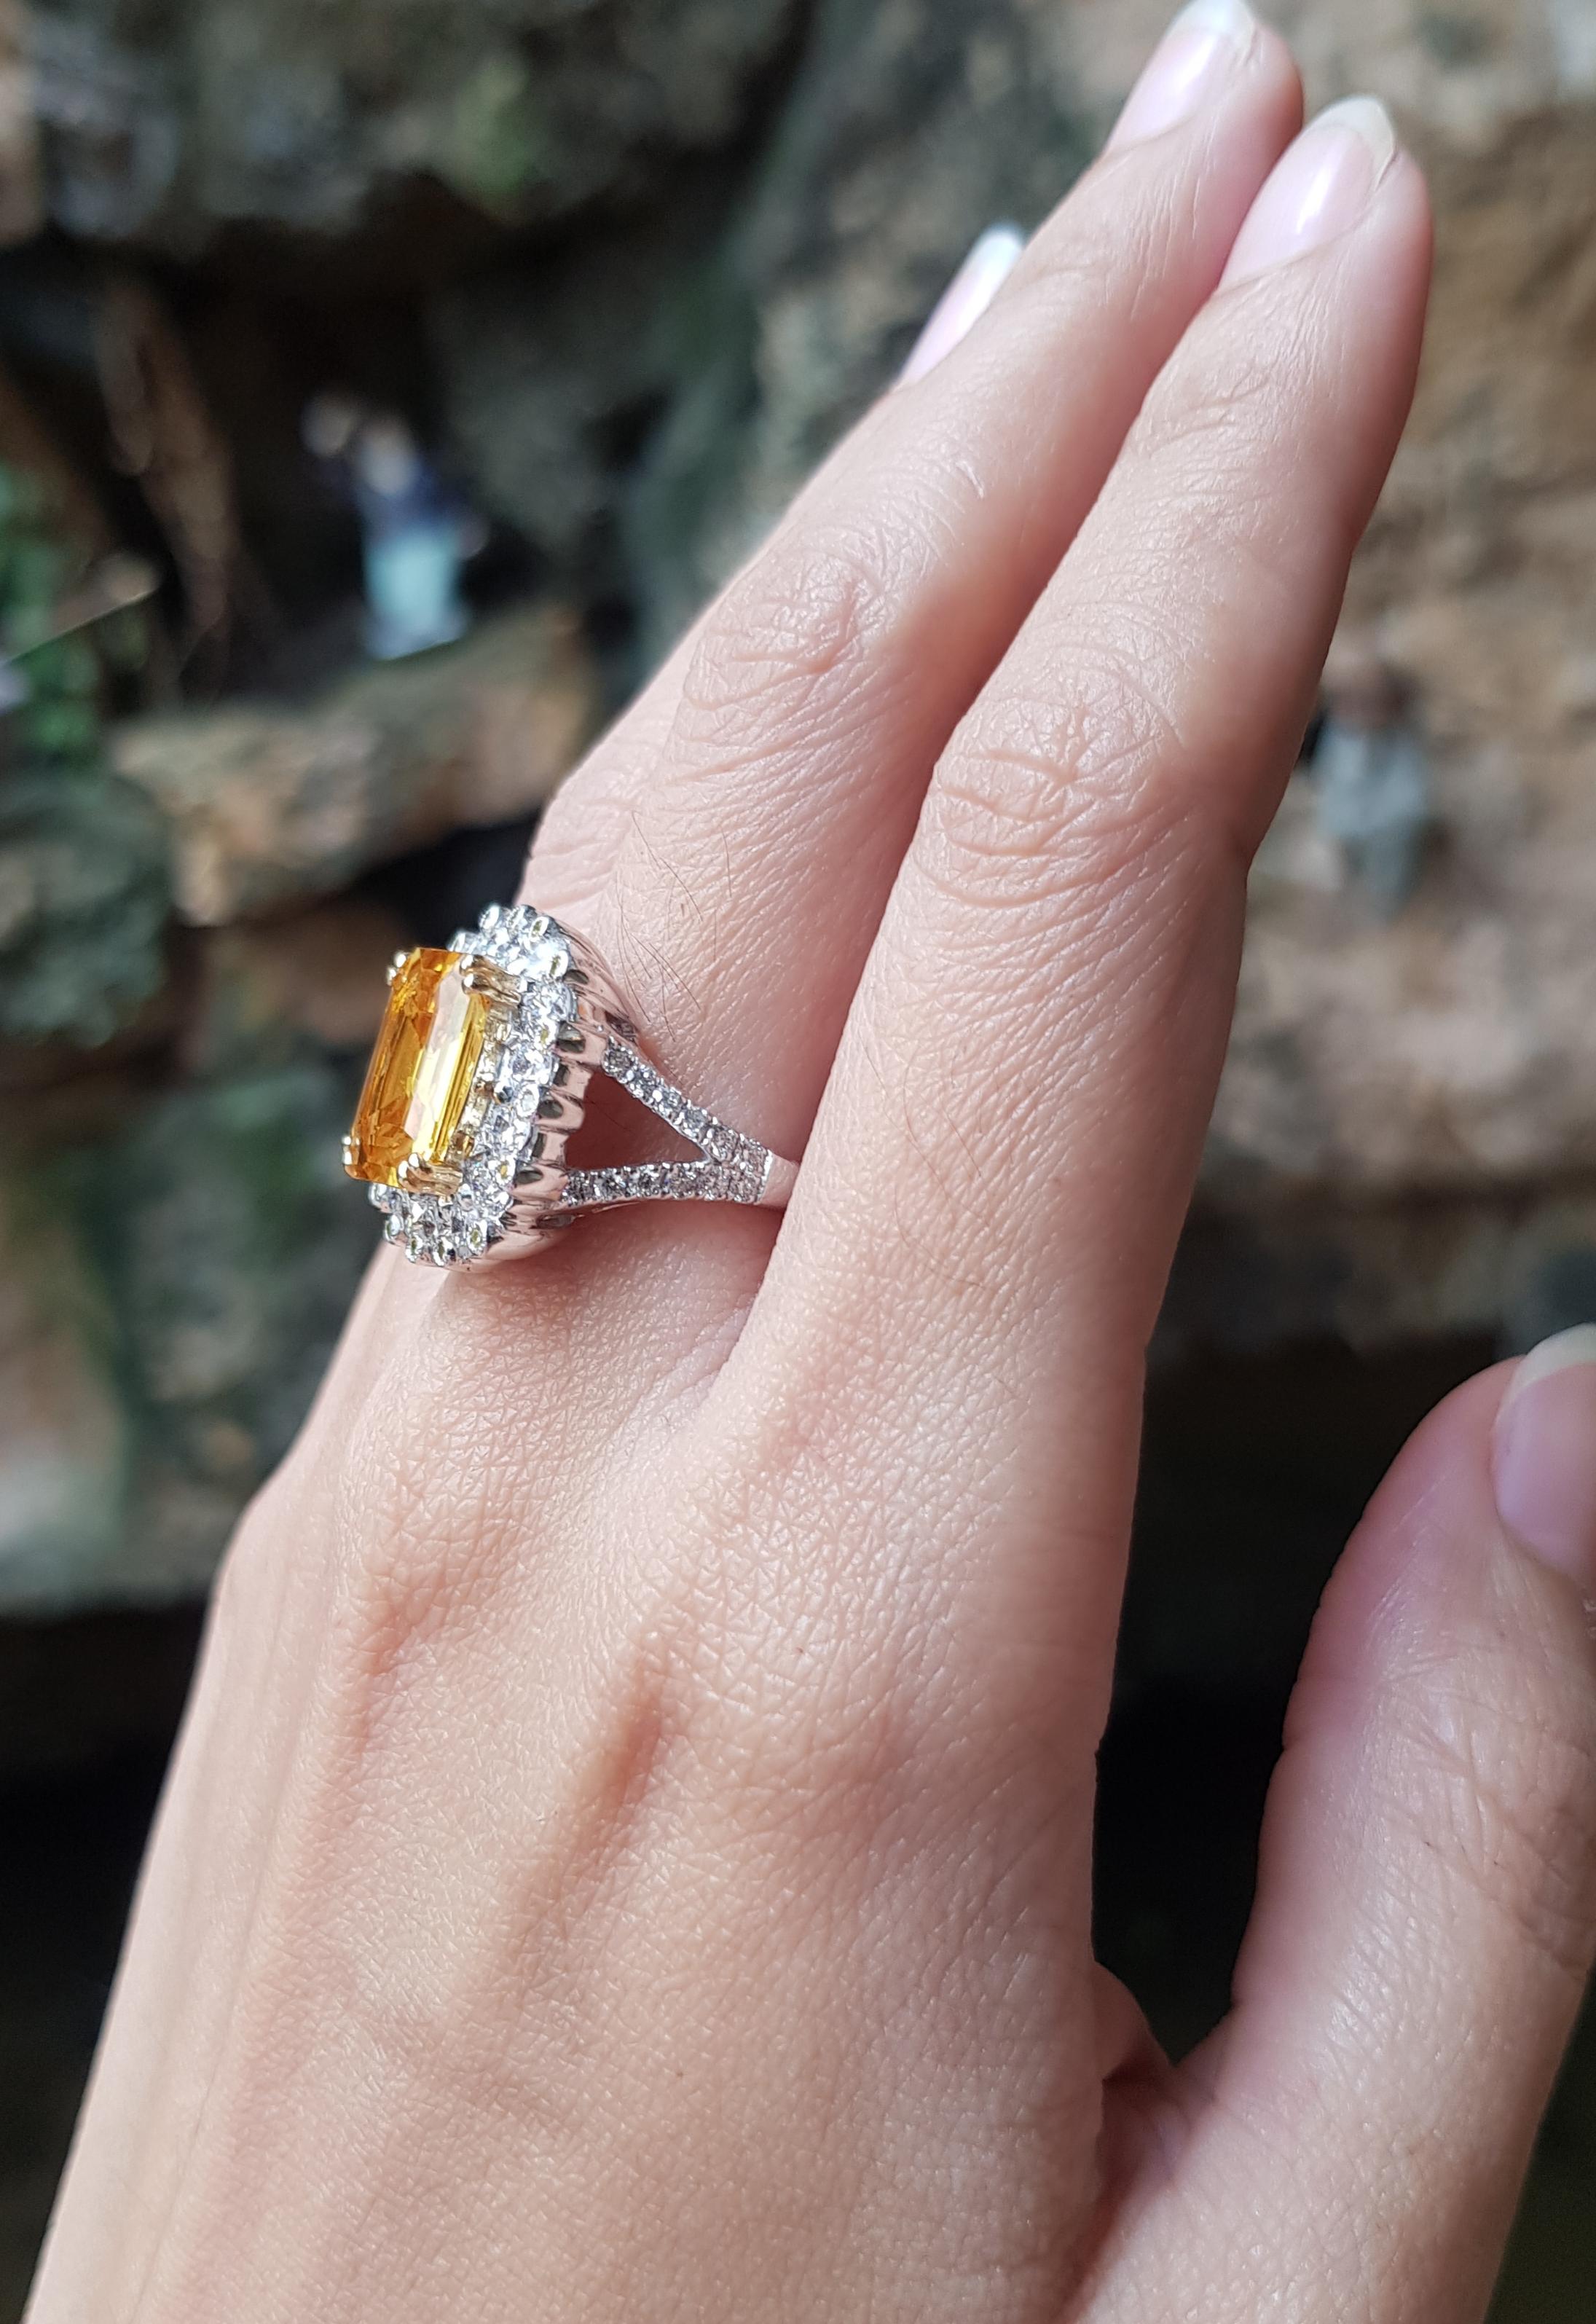 Yellow Sapphire 5.20 carats with Yellow Diamond 0.11 carat and Diamond 1.84 carats Ring set in 18 Karat White Gold Settings

Width:  0.7 cm 
Length: 1.9 cm
Ring Size: 51
Total Weight: 12.53 grams

